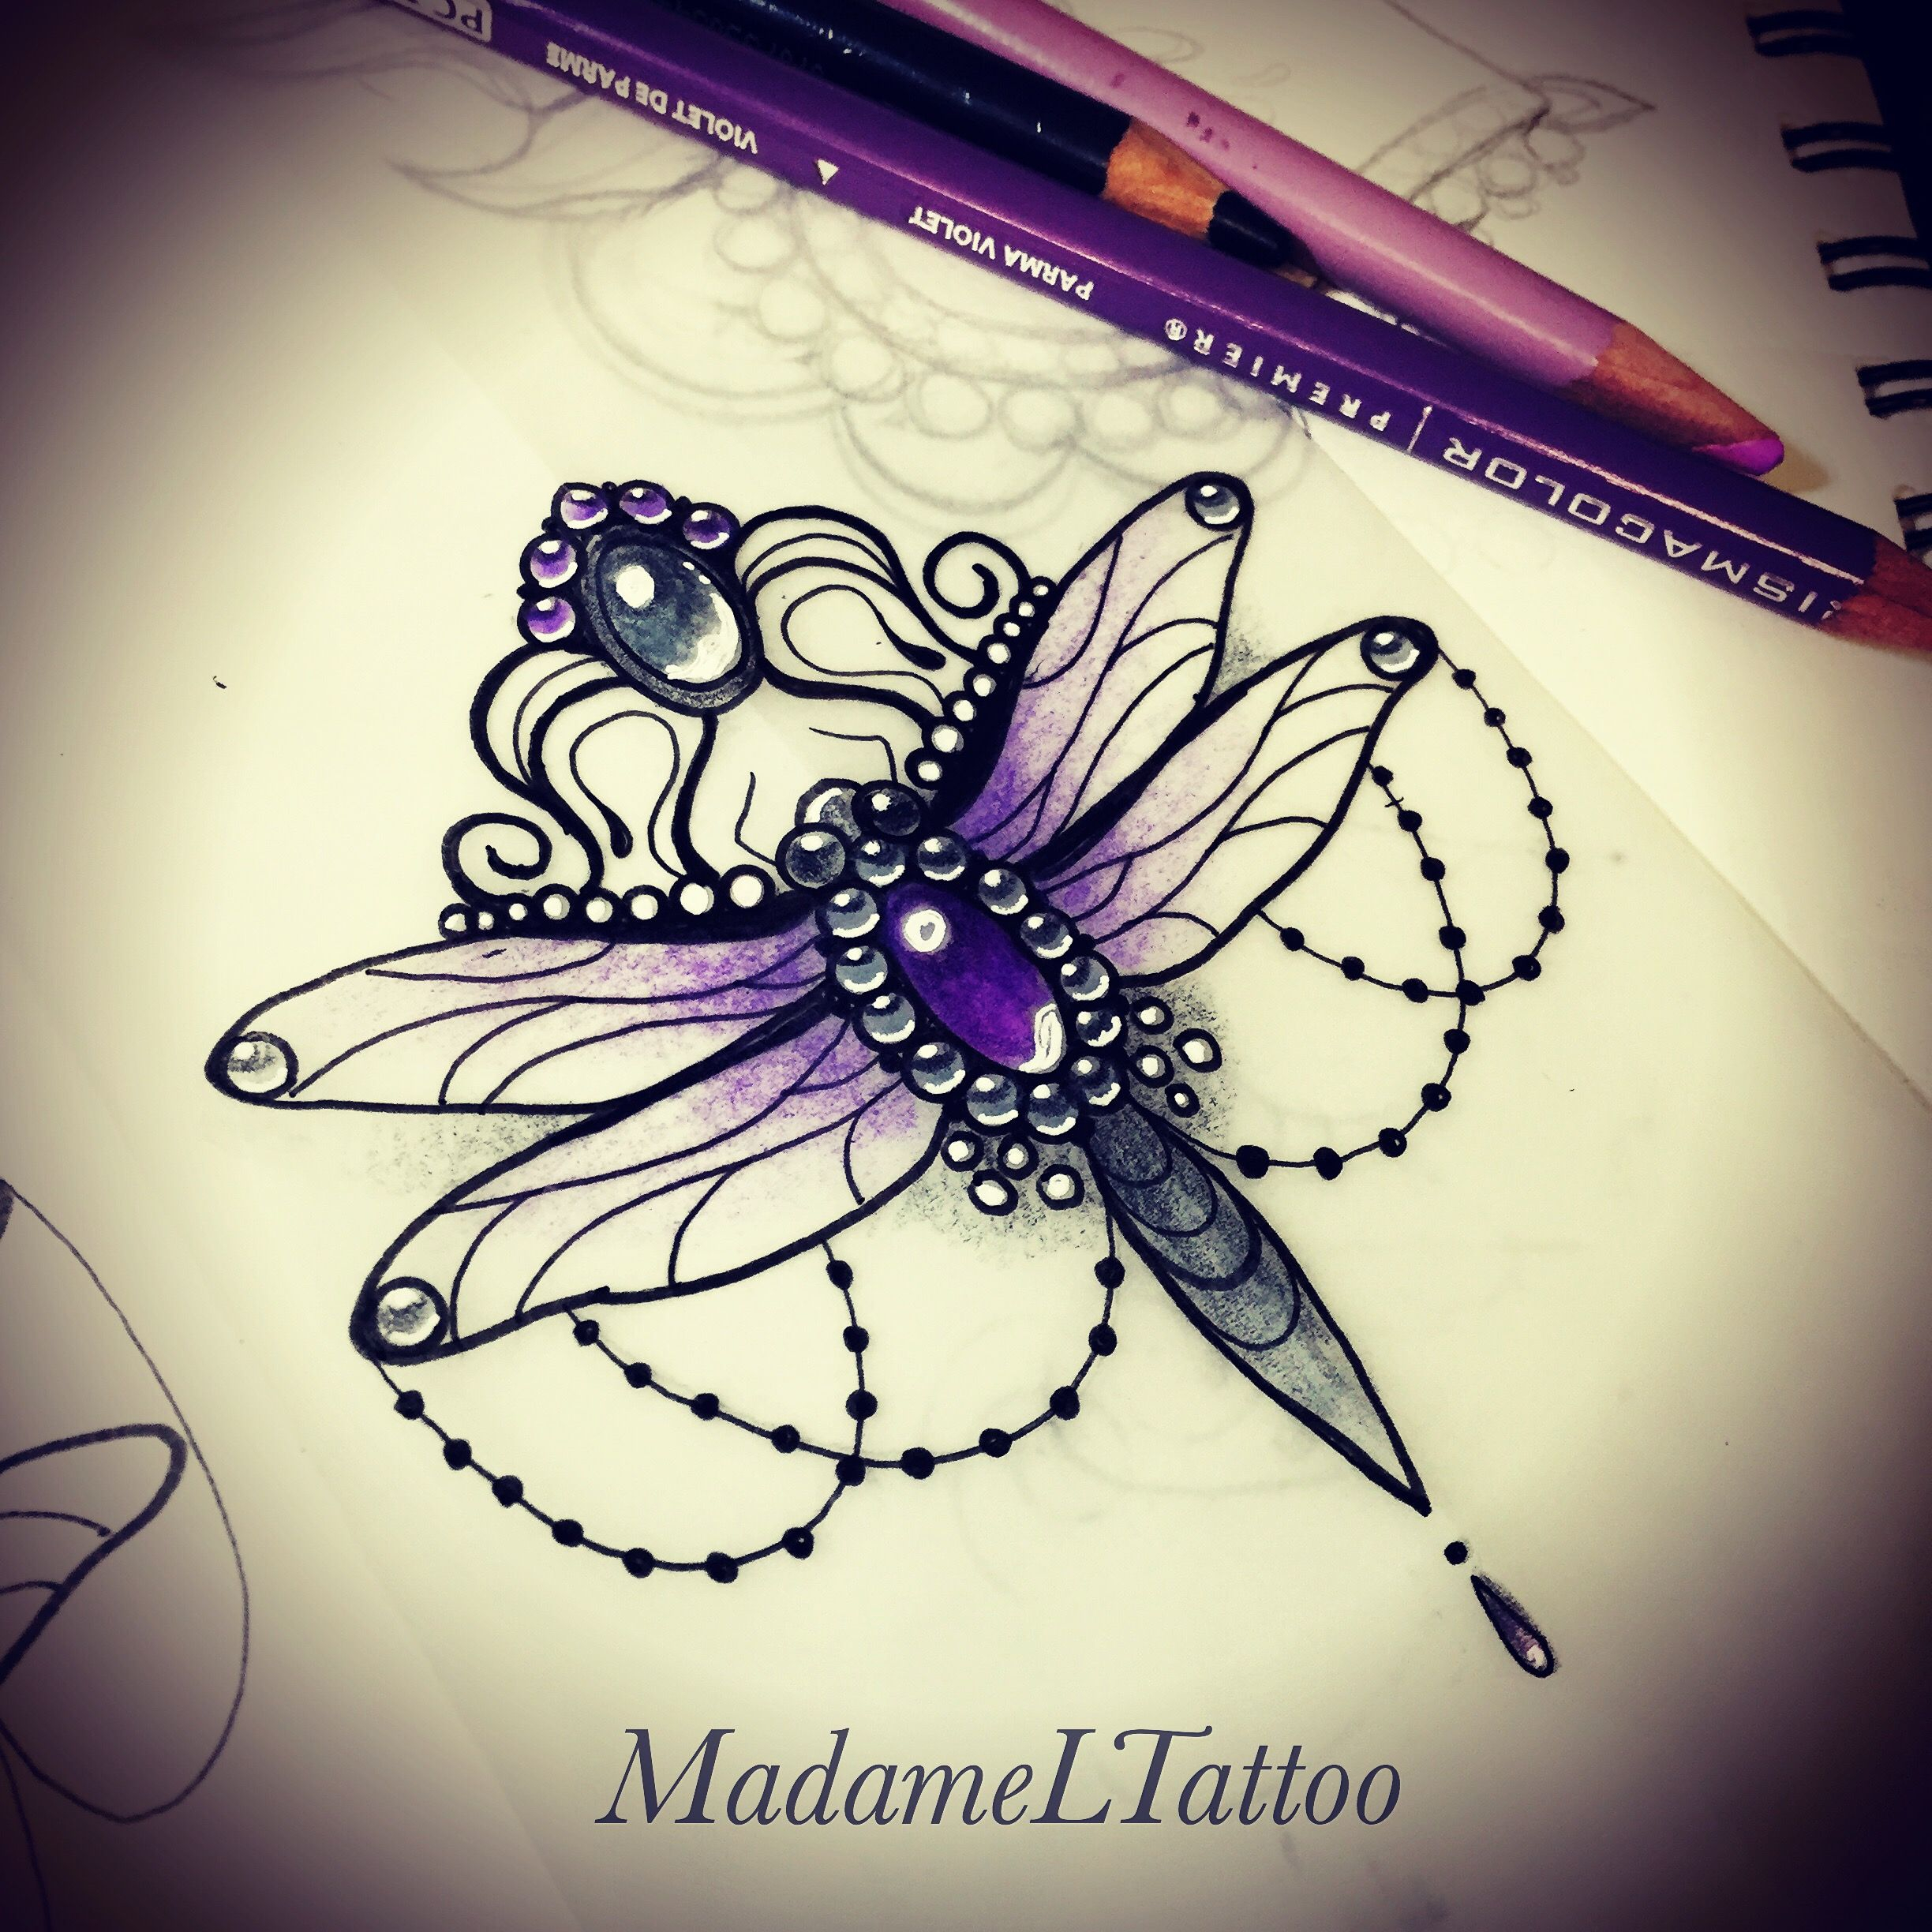 Dragonfly Doodles Madame L Tattoos Dragonfly Tattoo Jewel intended for dimensions 2448 X 2448